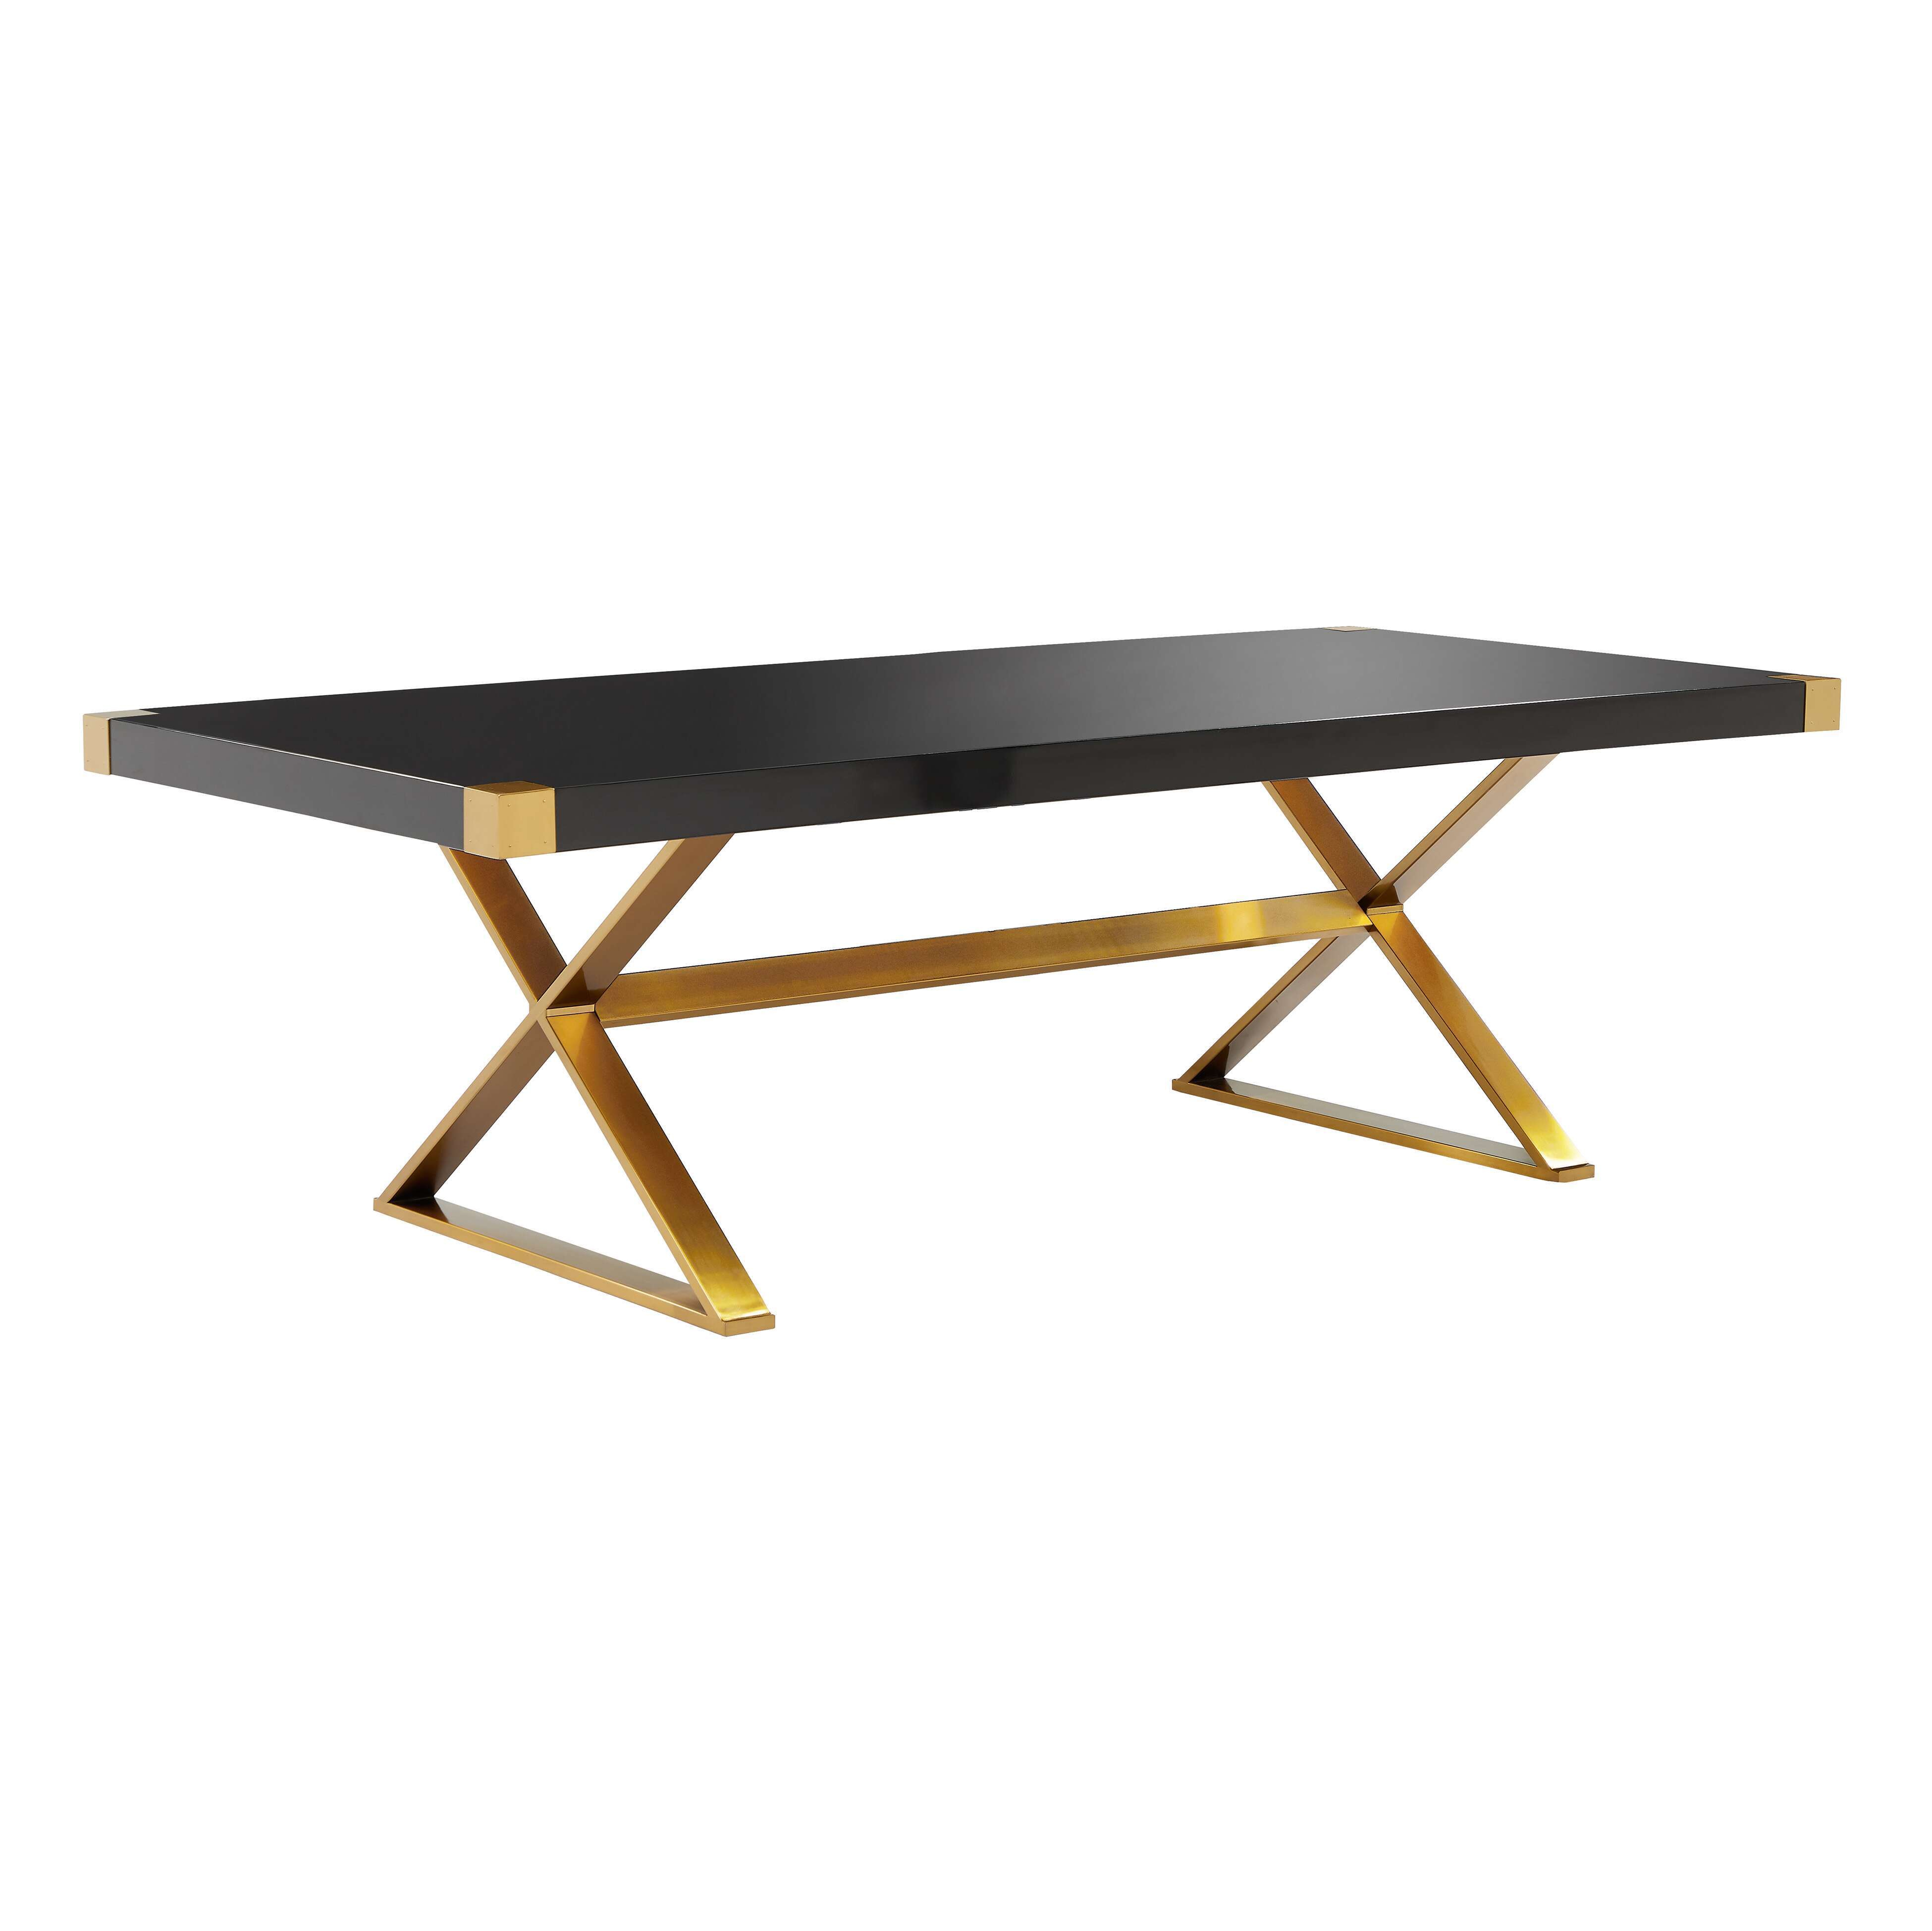 Adeline Black Lacquer Dining Table - Maren Home